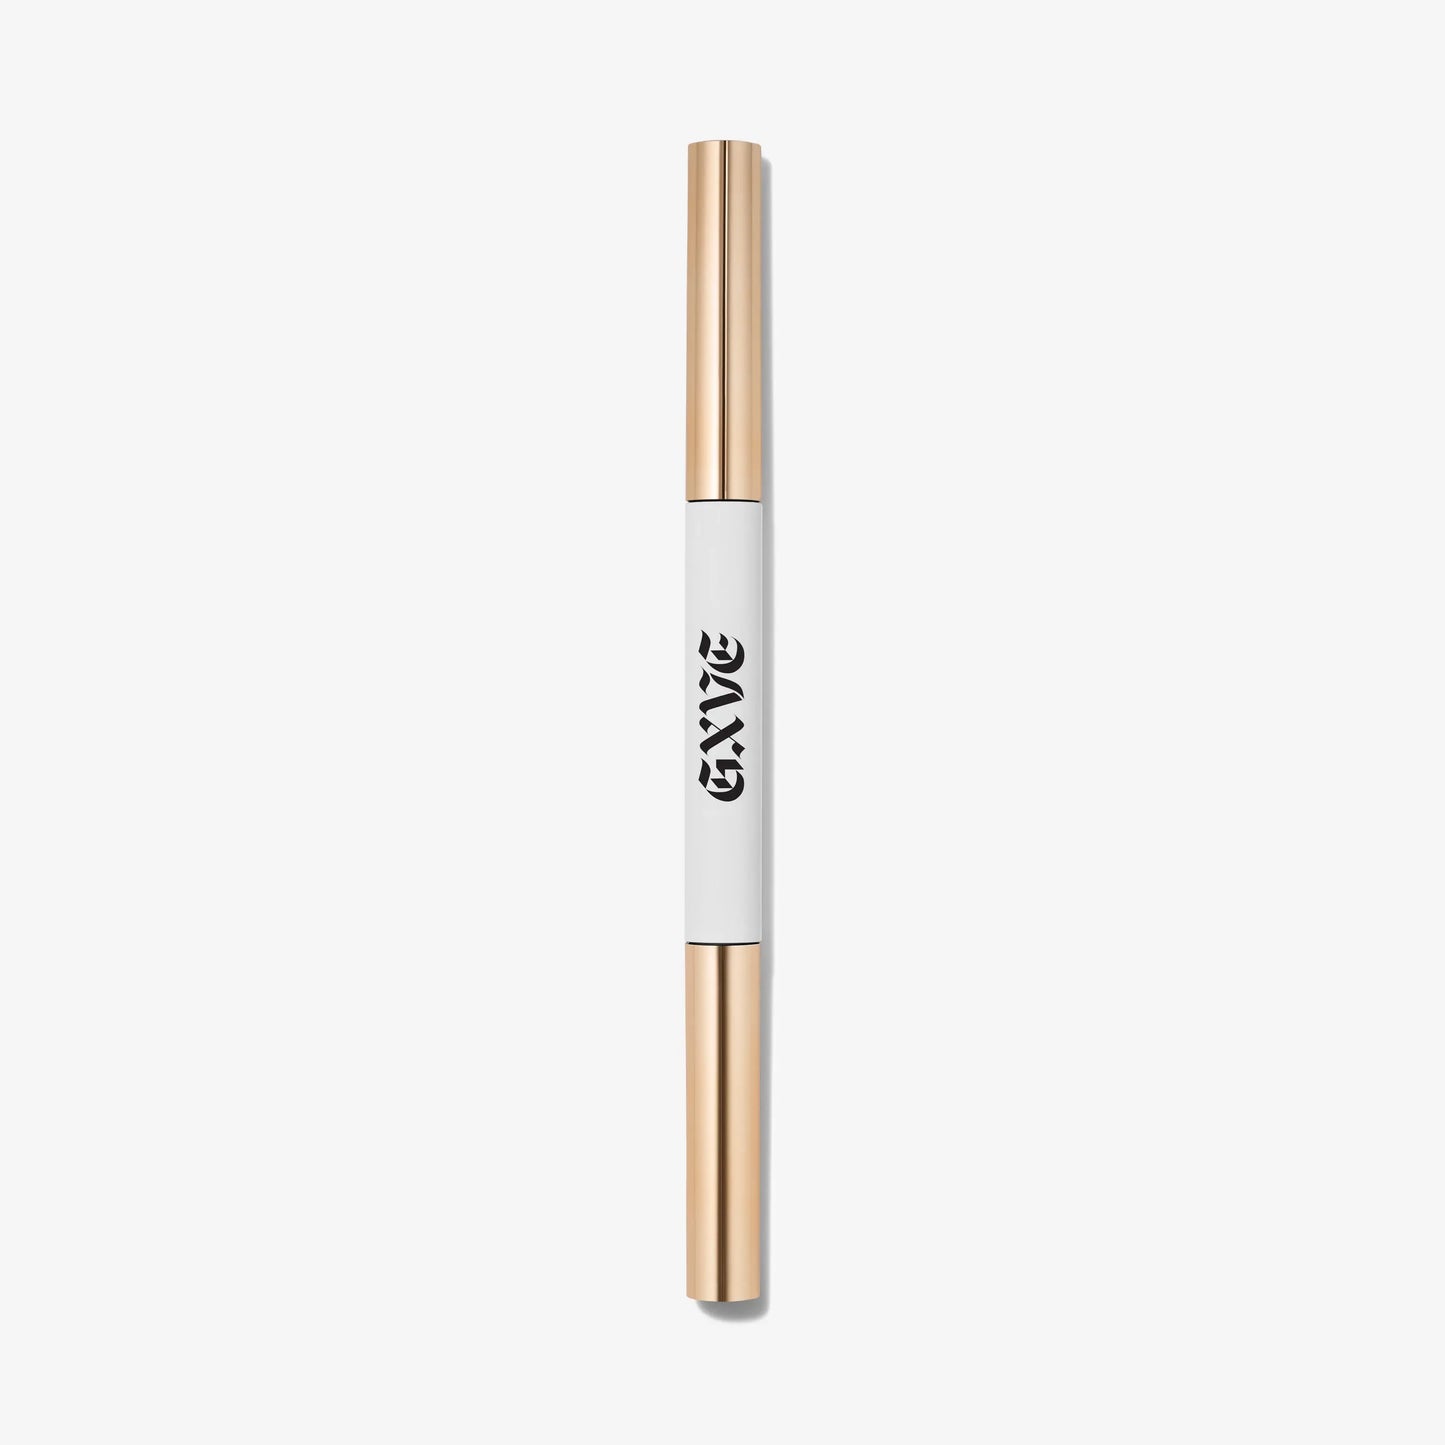 GXVE 3 - Ultra-Fine Eyebrow Pencil For Natural Brows